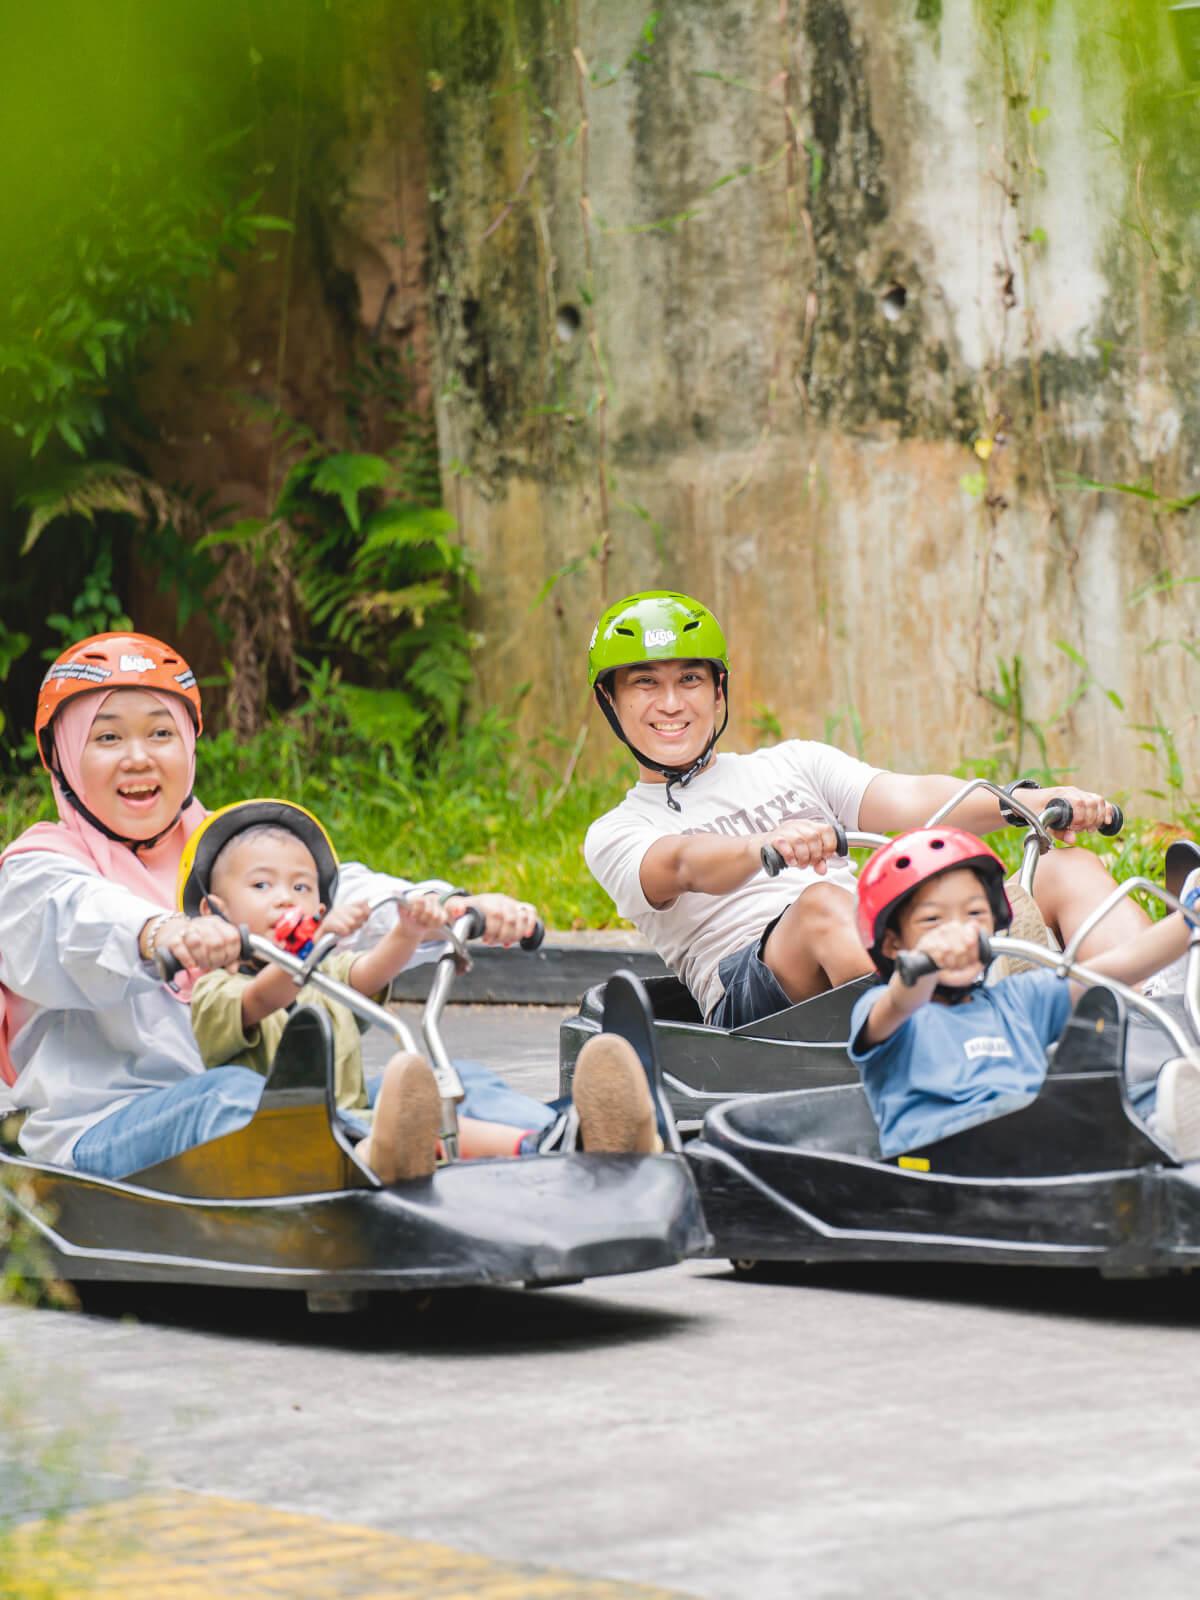 A family group rides down the tracks together with children riding in the same cart as an adult and one riding by himself.